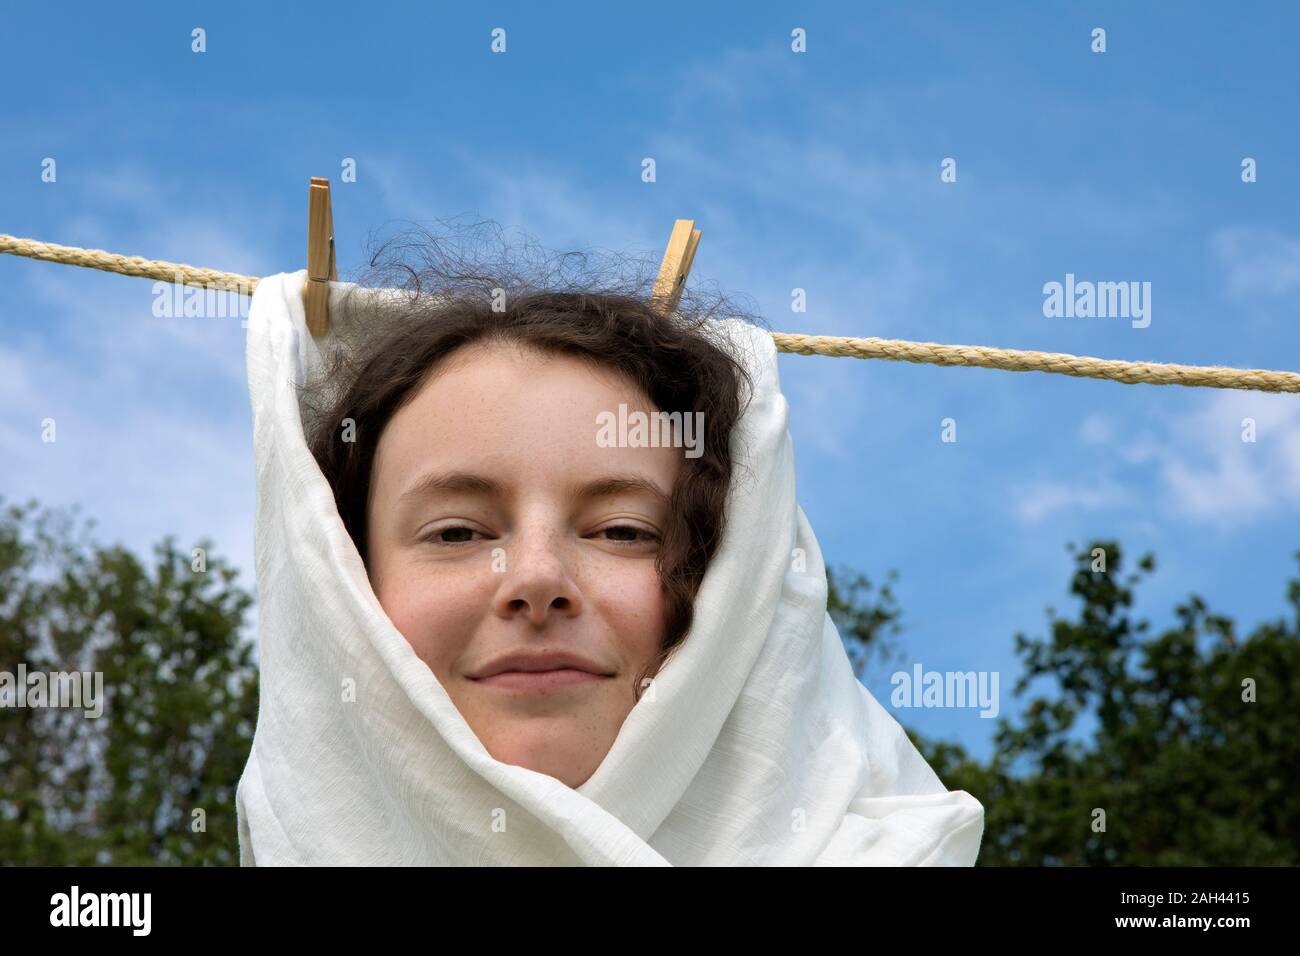 Portrait of smiling young woman wrapped in white cloth haning on clothesline Stock Photo